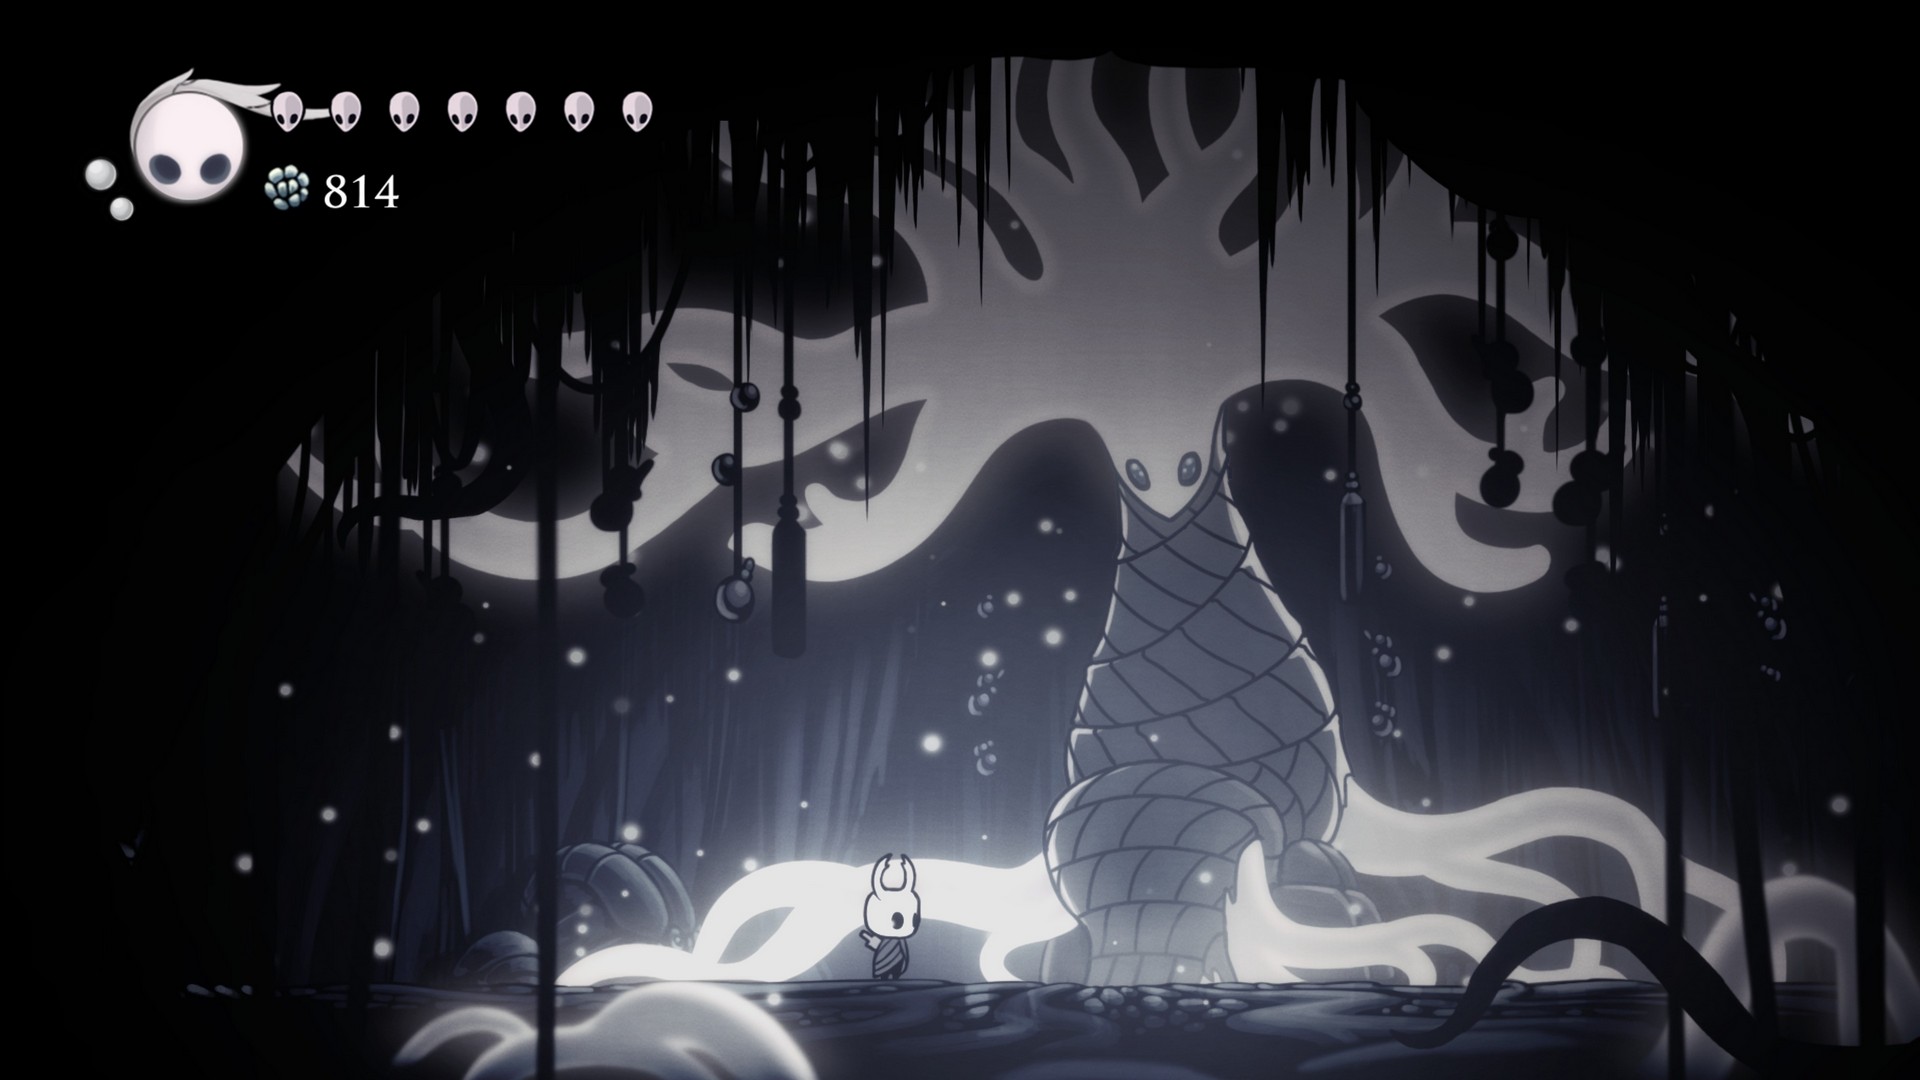 Computer Wallpapers Hollow Knight With high-resolution 1920X1080 pixel. You can use this wallpaper for your Windows and Mac OS computers as well as your Android and iPhone smartphones